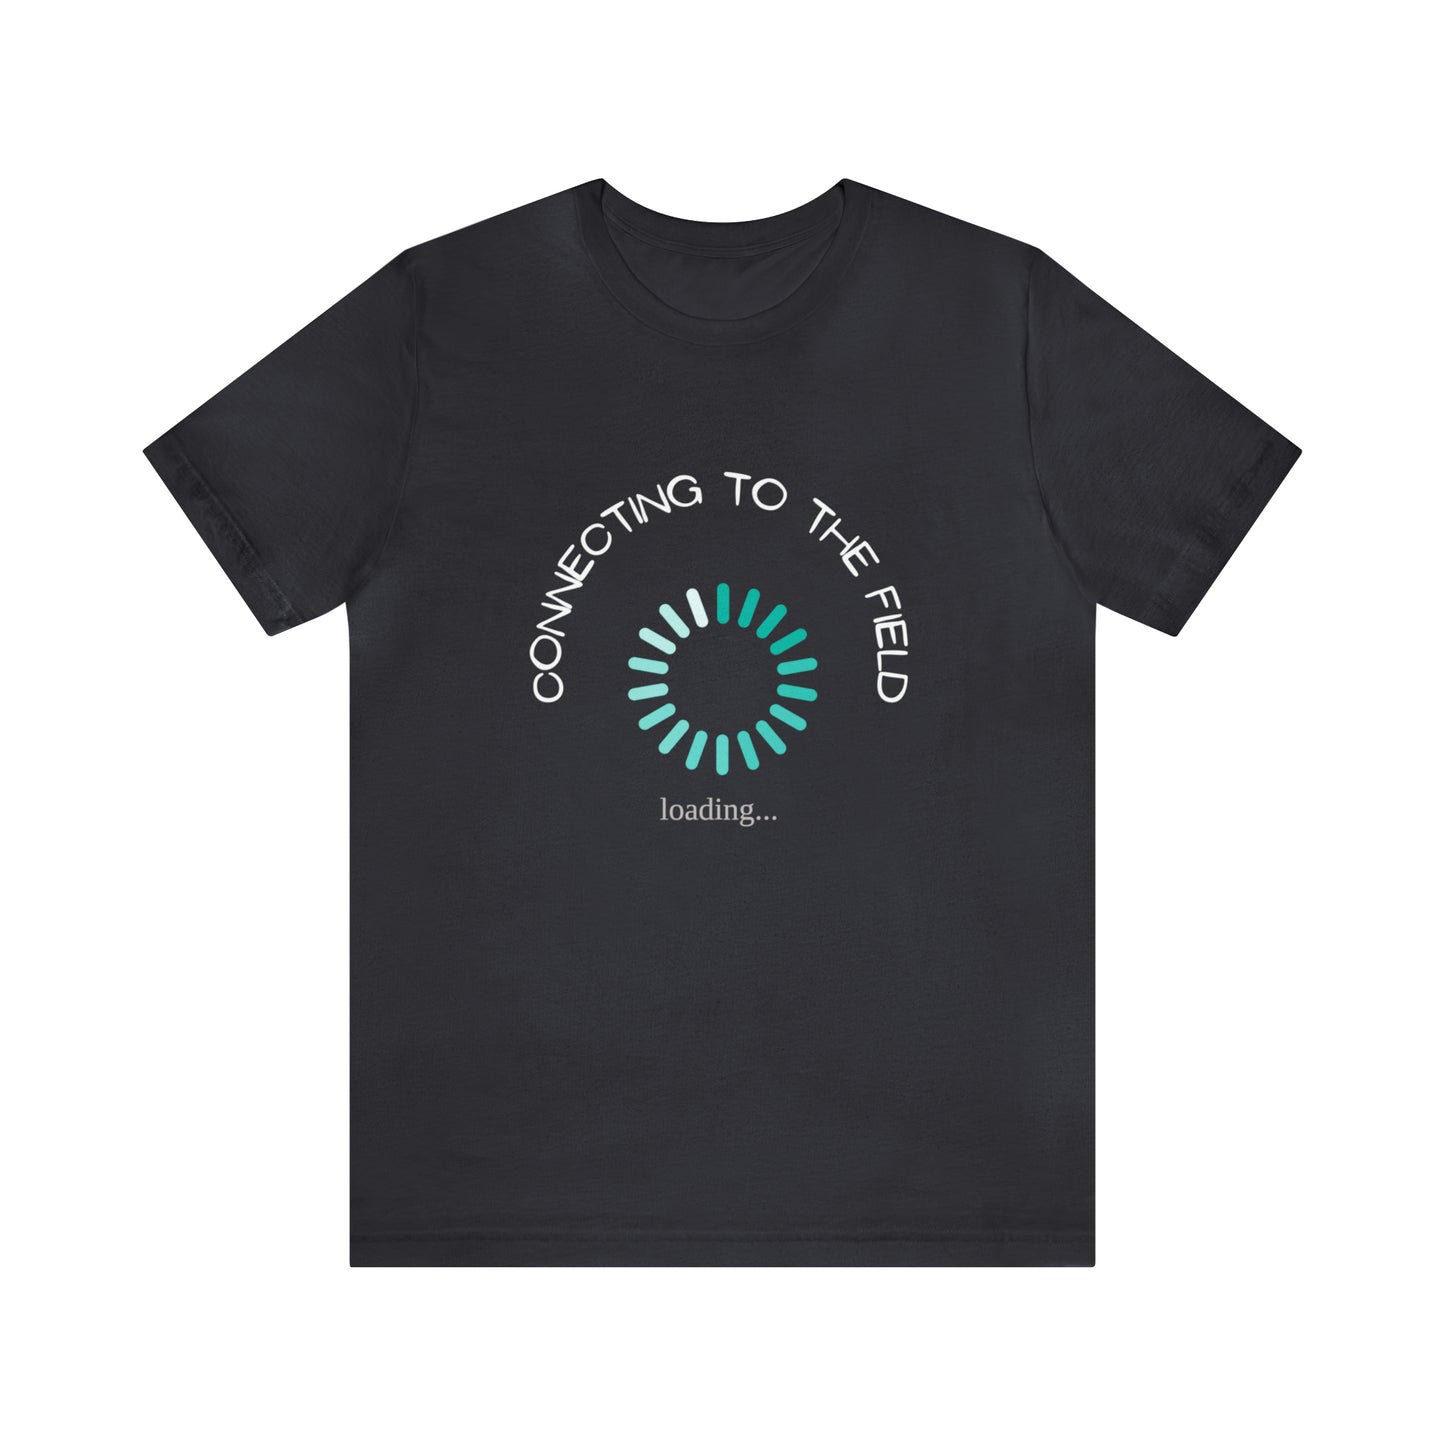 Connecting to the field! Inspirational T shirt